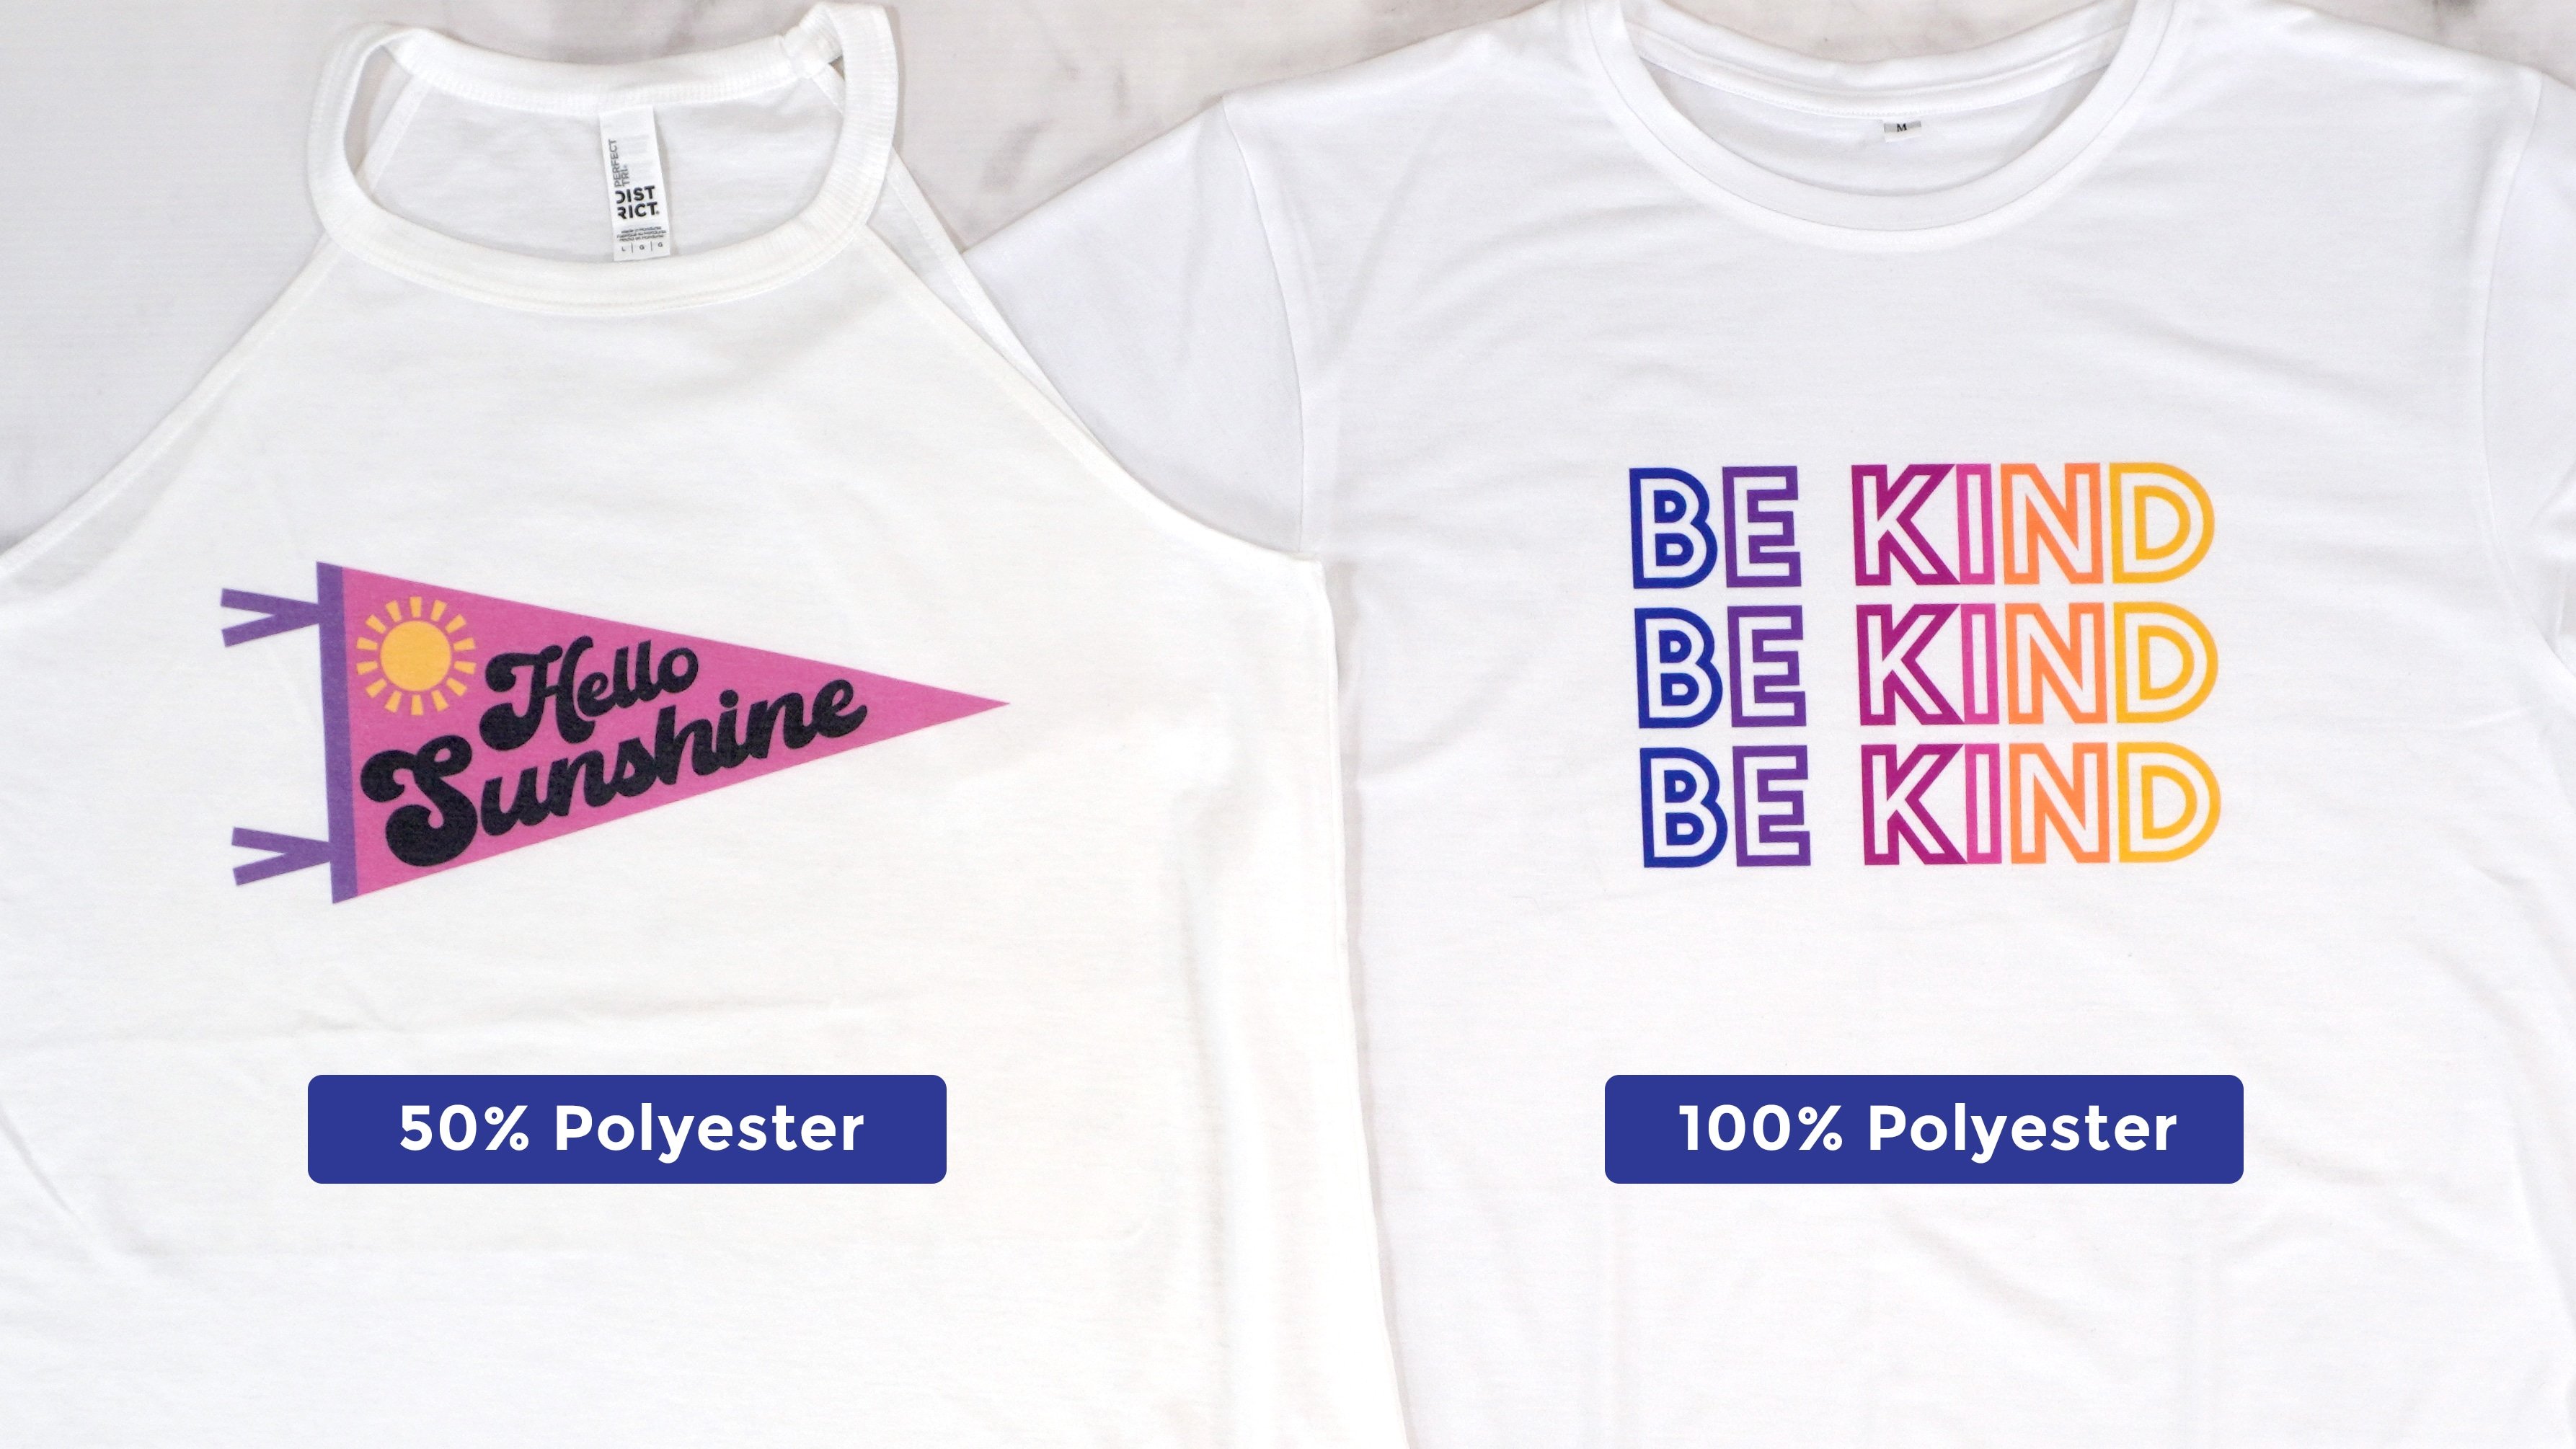 Two colorful printed white shirts side by side with labels "50% polyester" and "100% polyester"